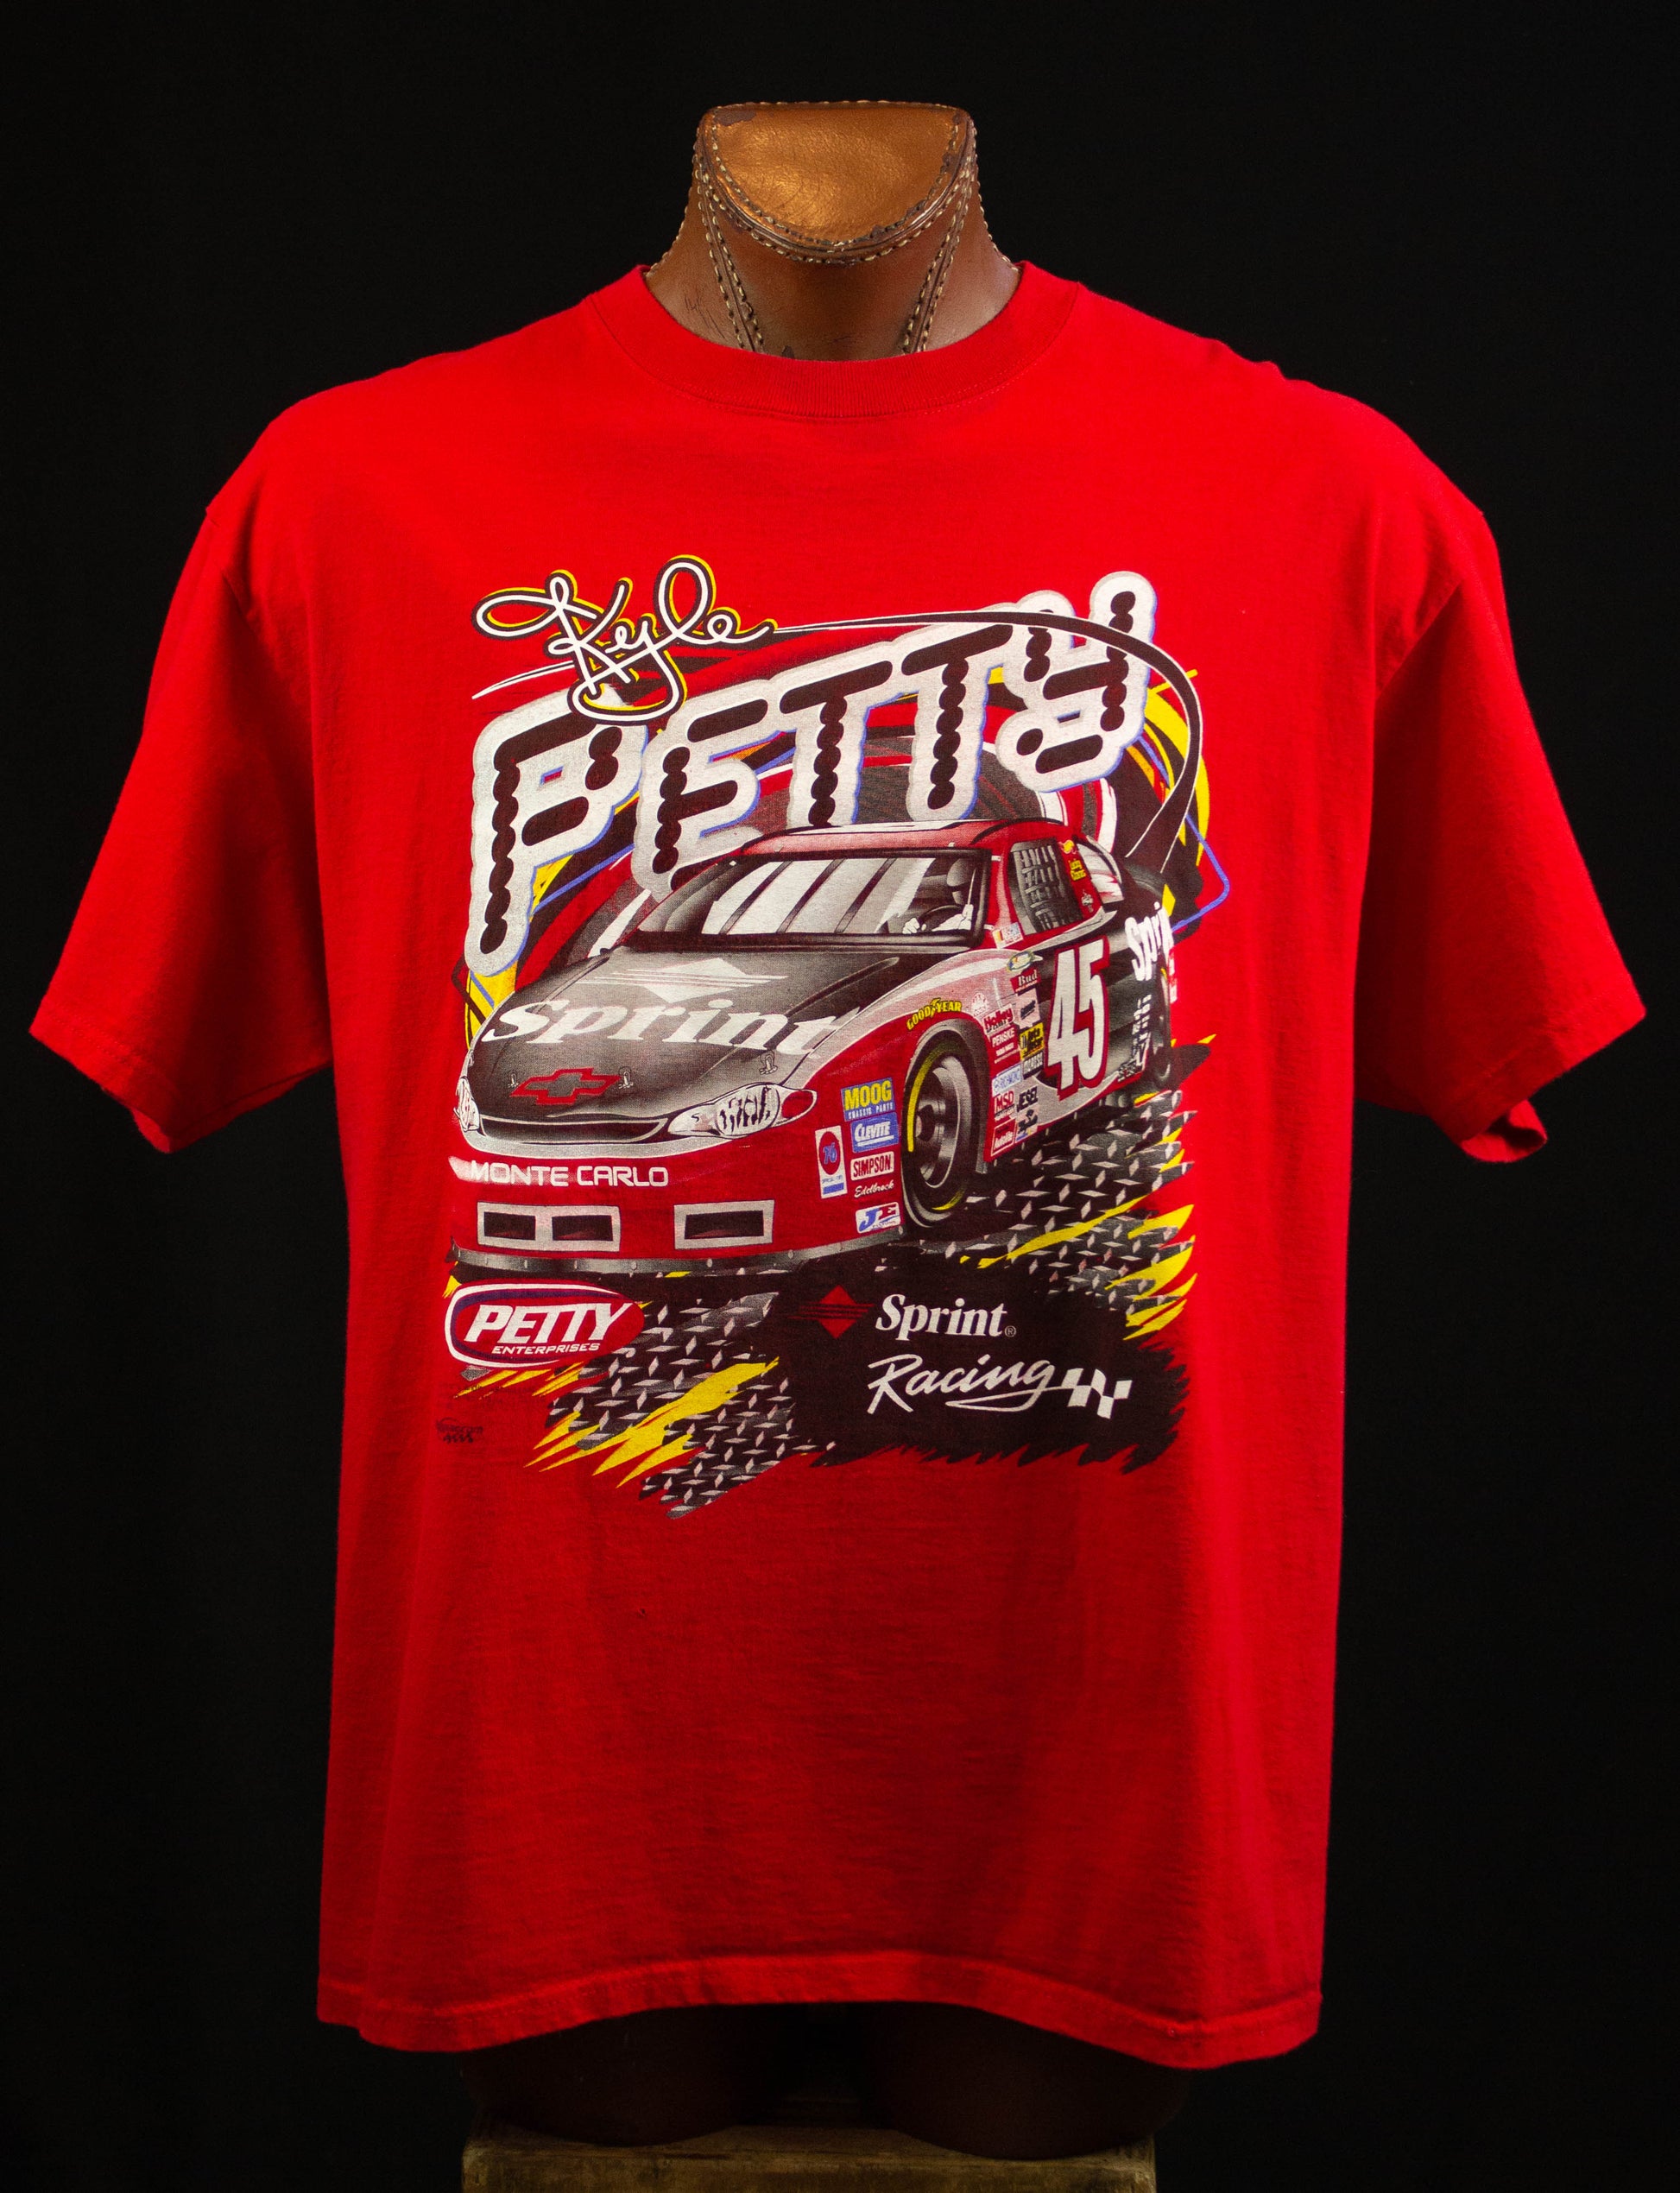  Vintage Kyle Petty Sprint Racing NASCAR Graphic T Shirt 1999 Red and Yellow XL